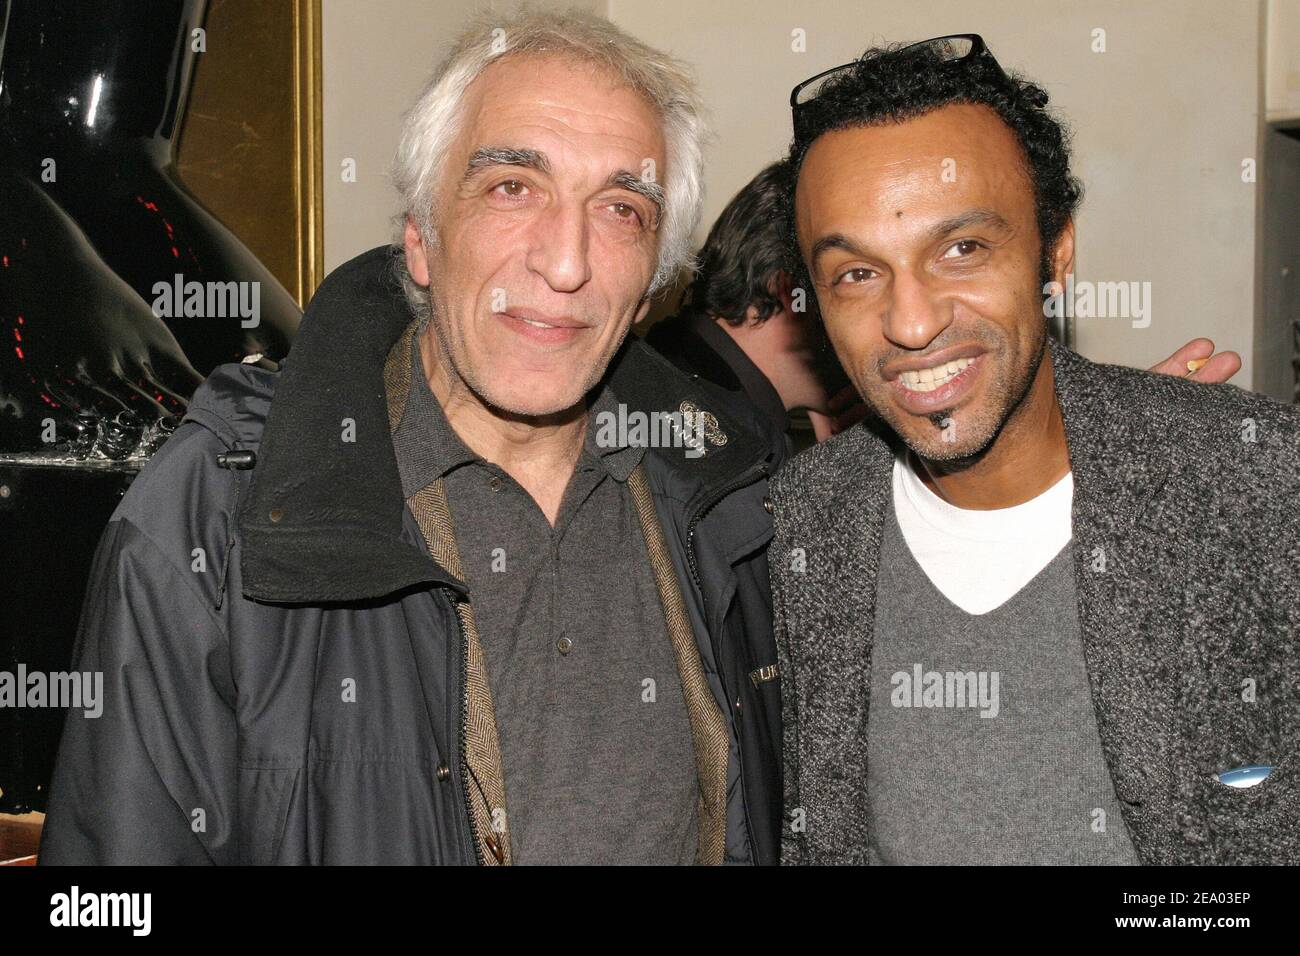 French actor Gerard Darmon (L) and musician Manou Katche attend the Cellboost party for mobile phone accessories organized by Worldline Communications at the VIP Room in Paris, France, on February 17, 2005. Photo by Benoit Pinguet/ABACA. Stock Photo